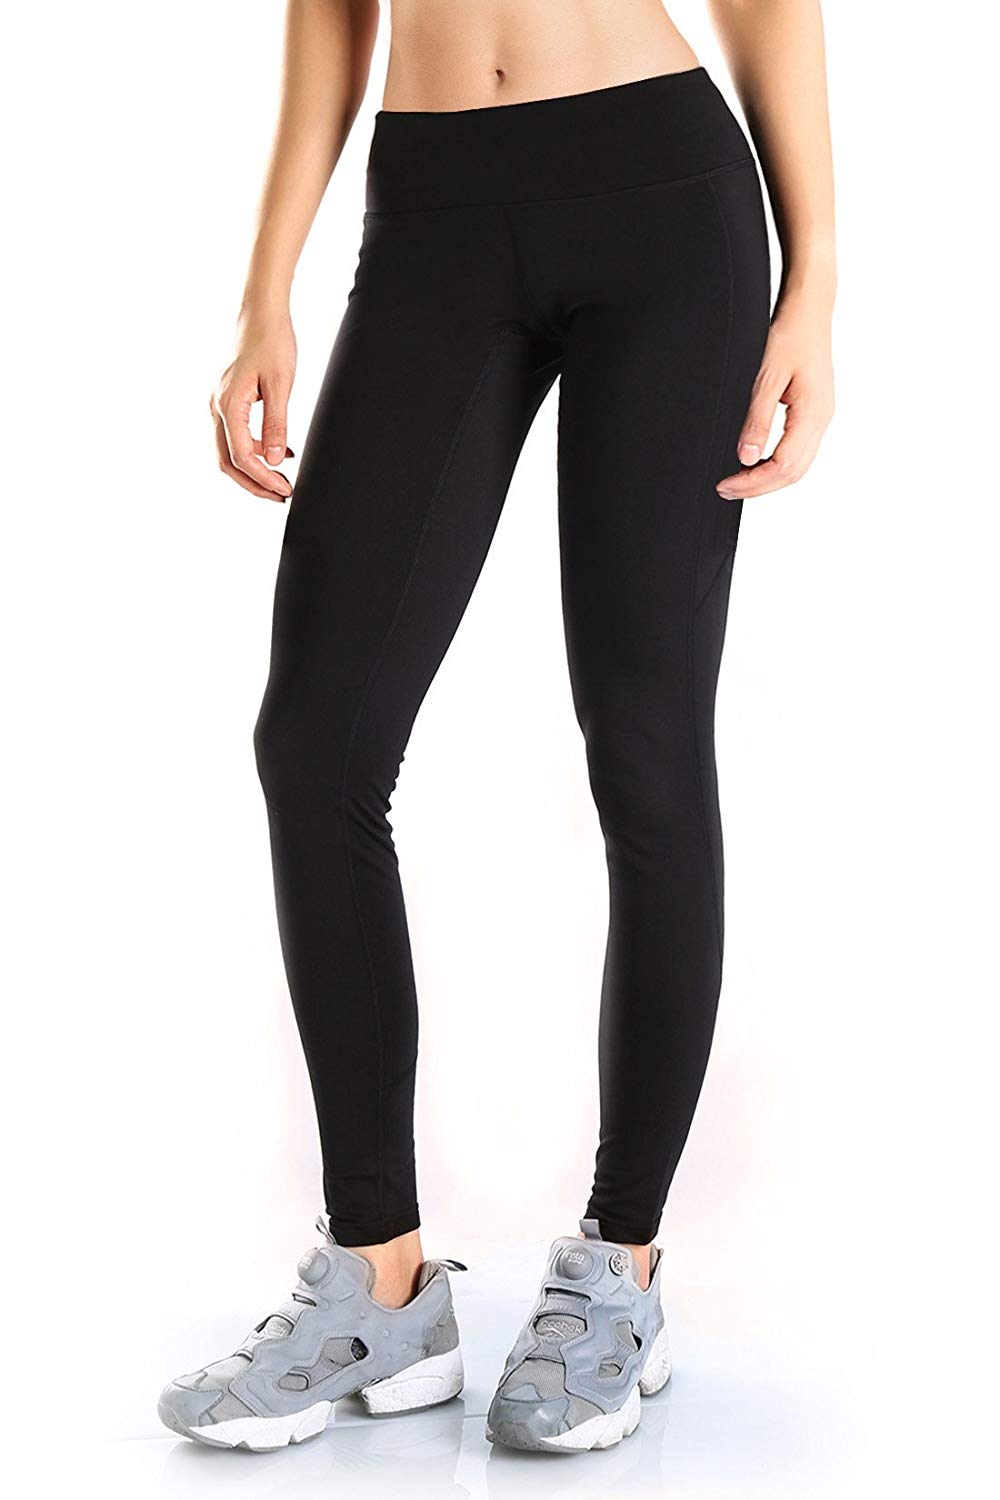 Sea slug Be confused squeeze 29 Leggings for Tall Women to Shop Now | Who What Wear